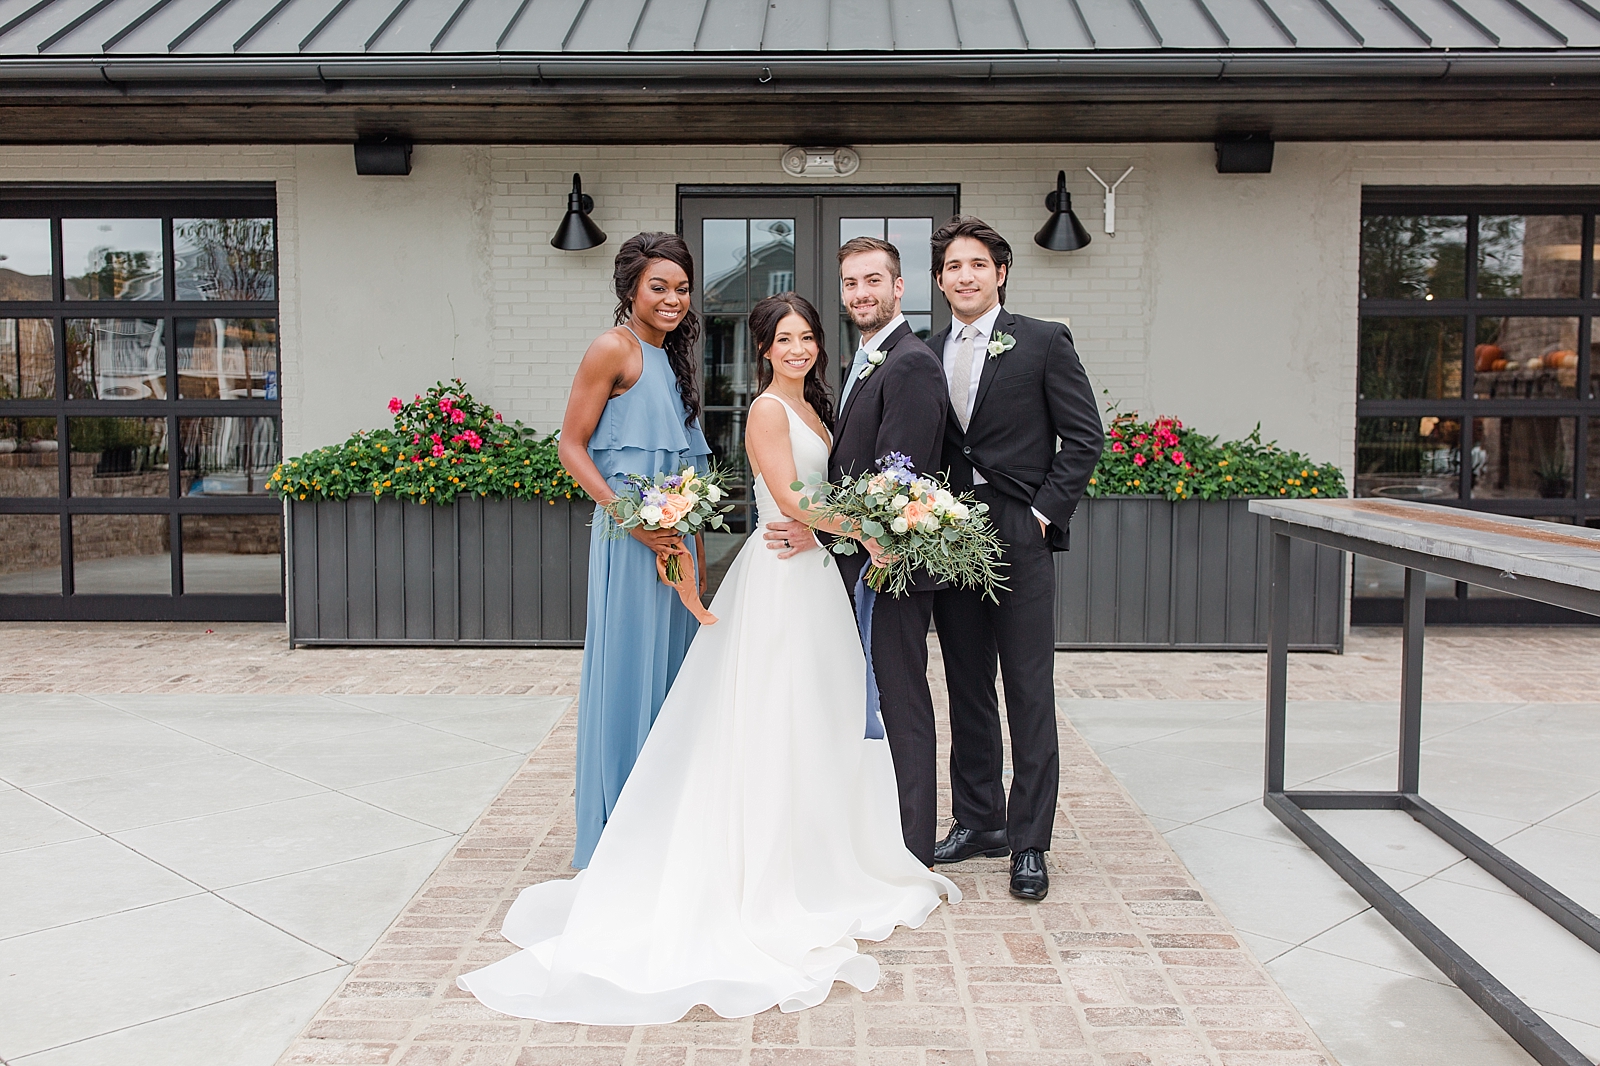 Glover Park Brewery Wedding Bridal Party on Back Patio of Venue Photo